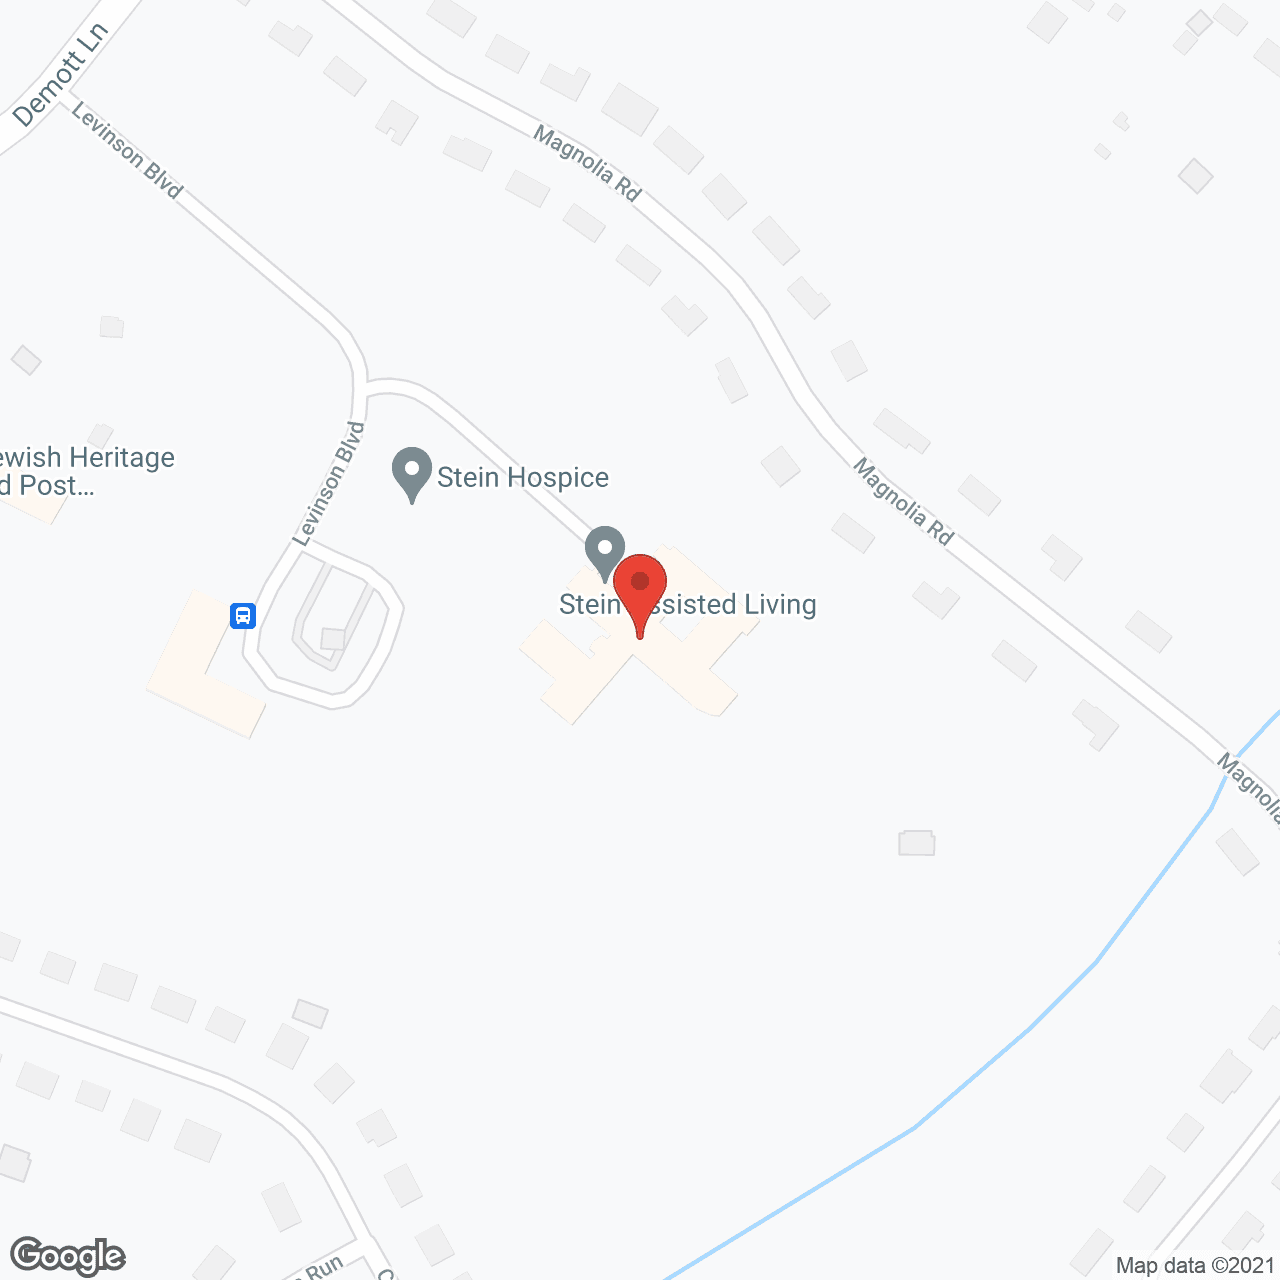 Stein Assisted Living in google map